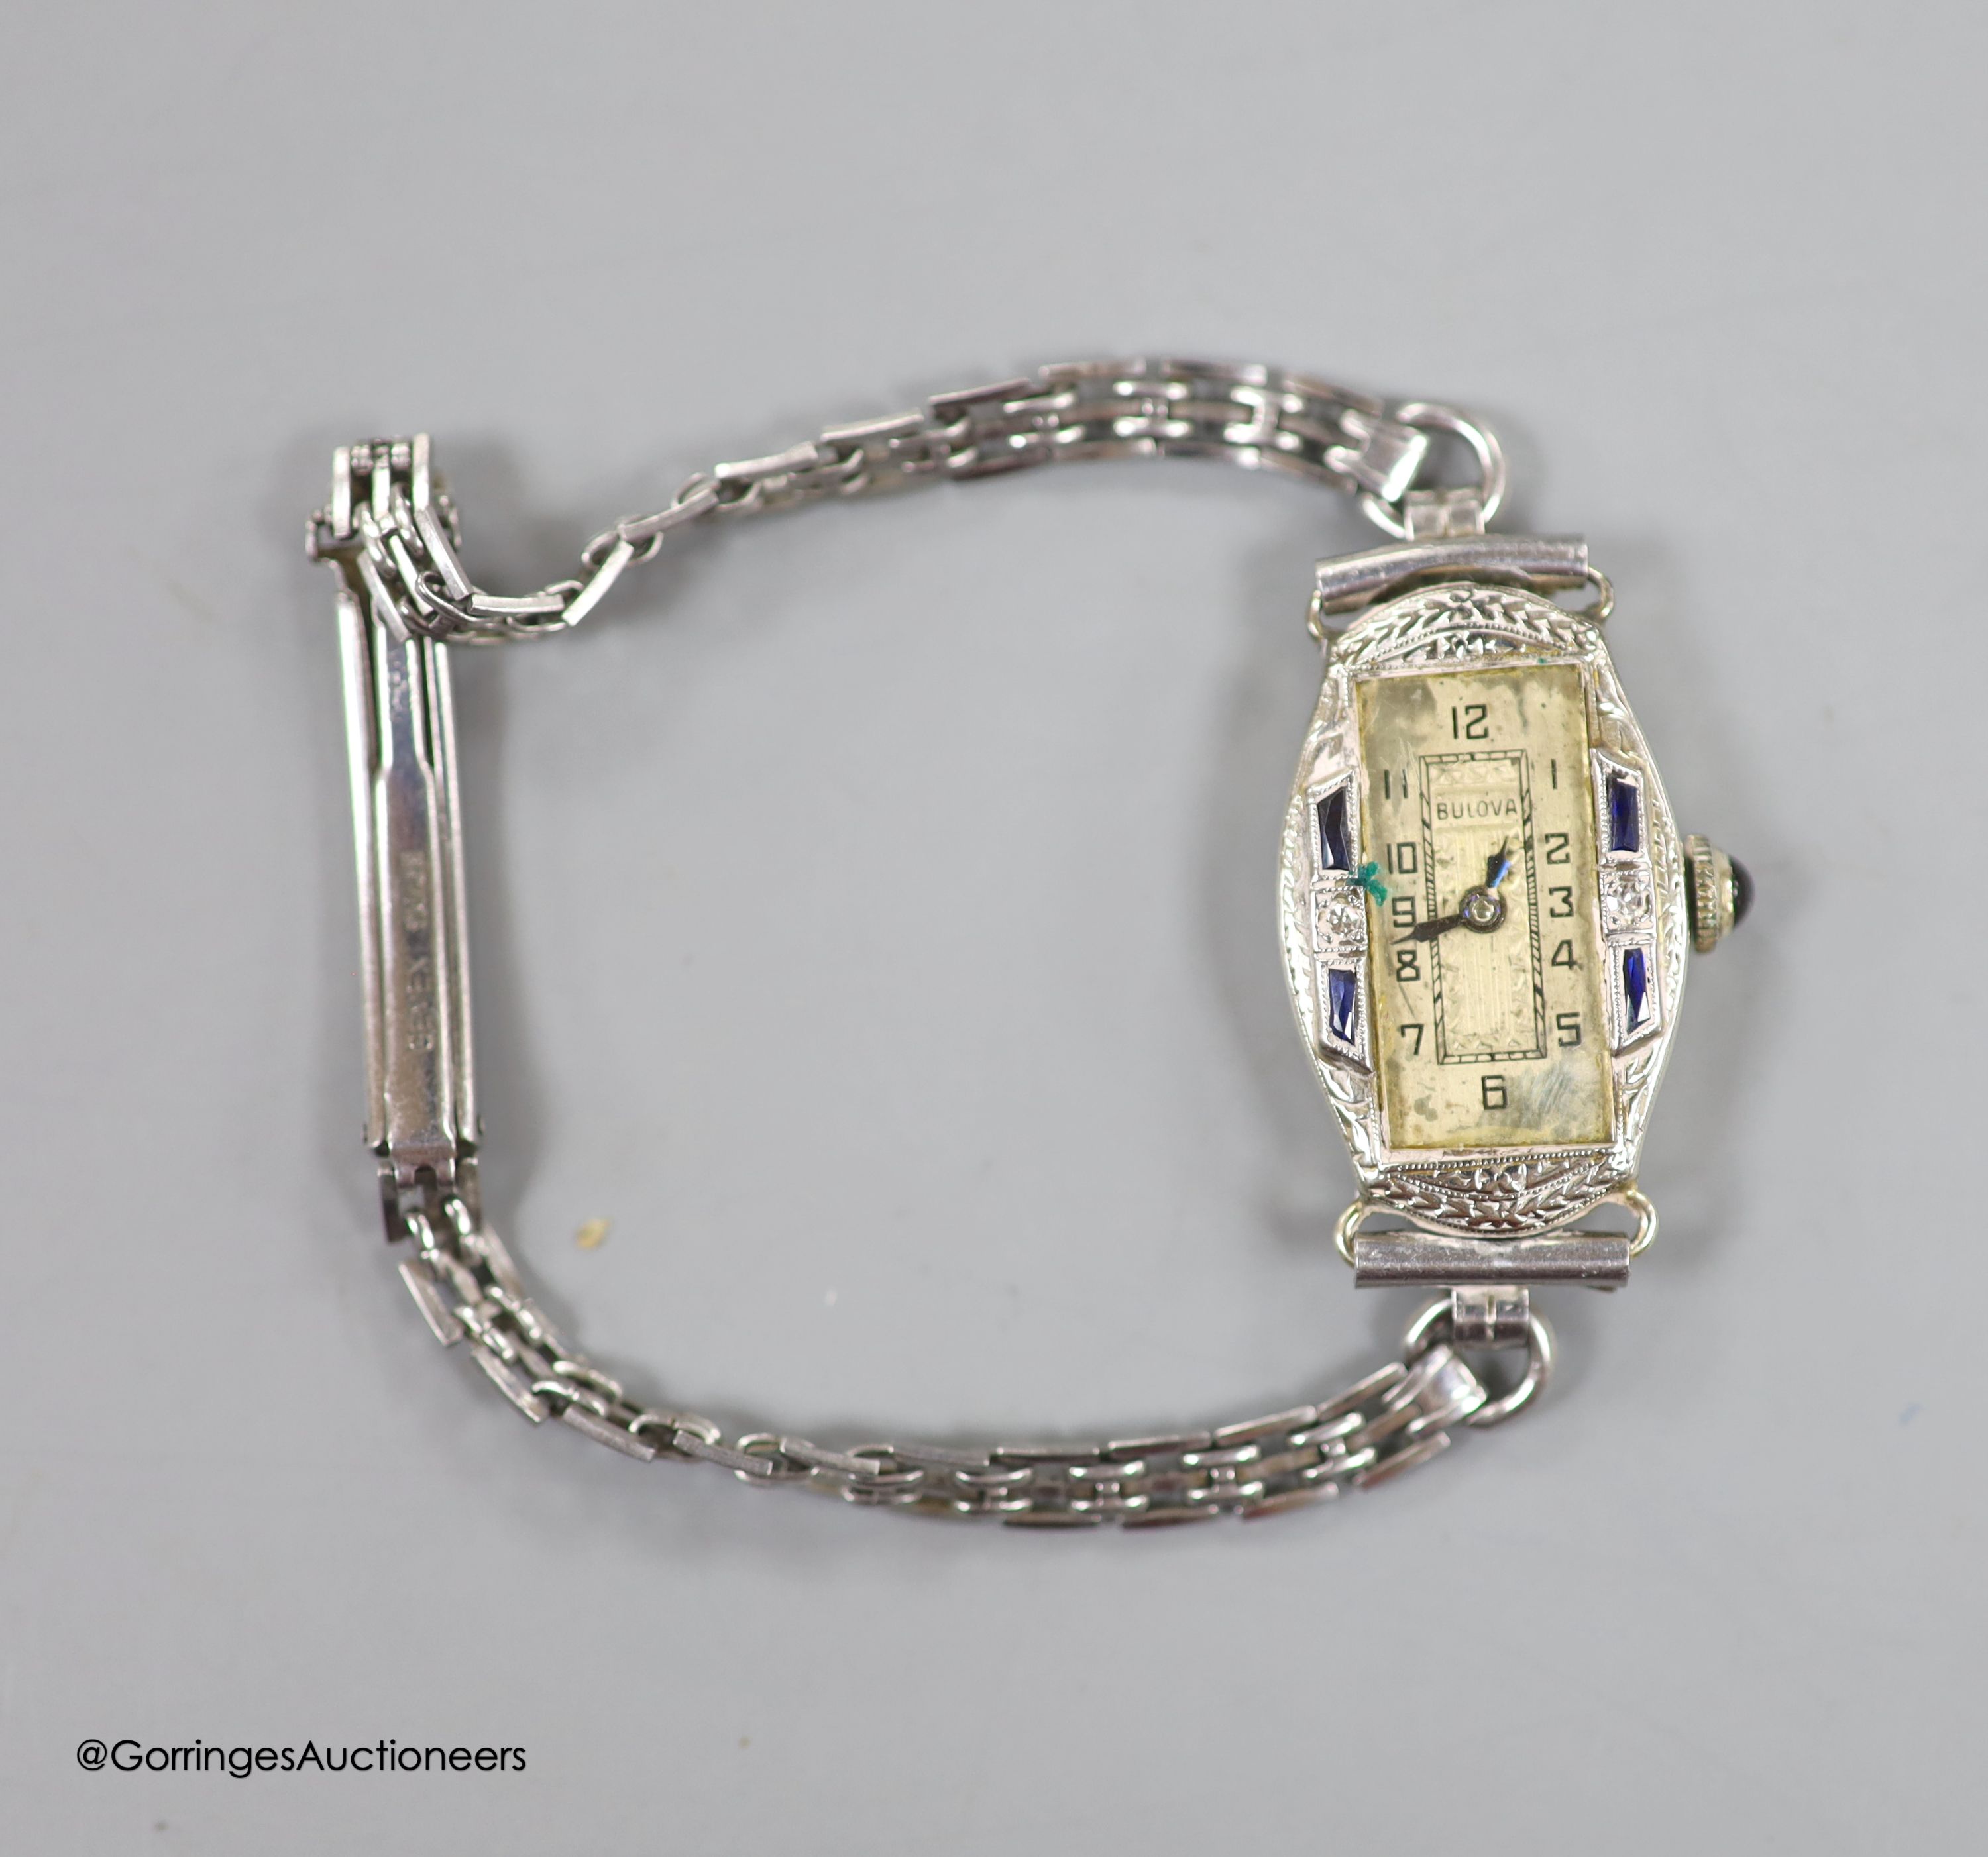 A lady's 1920's/1930's 18k white metal, synthetic sapphire? and diamond set Bulova manual wind cocktail watch, on a stainless steel bracelet.